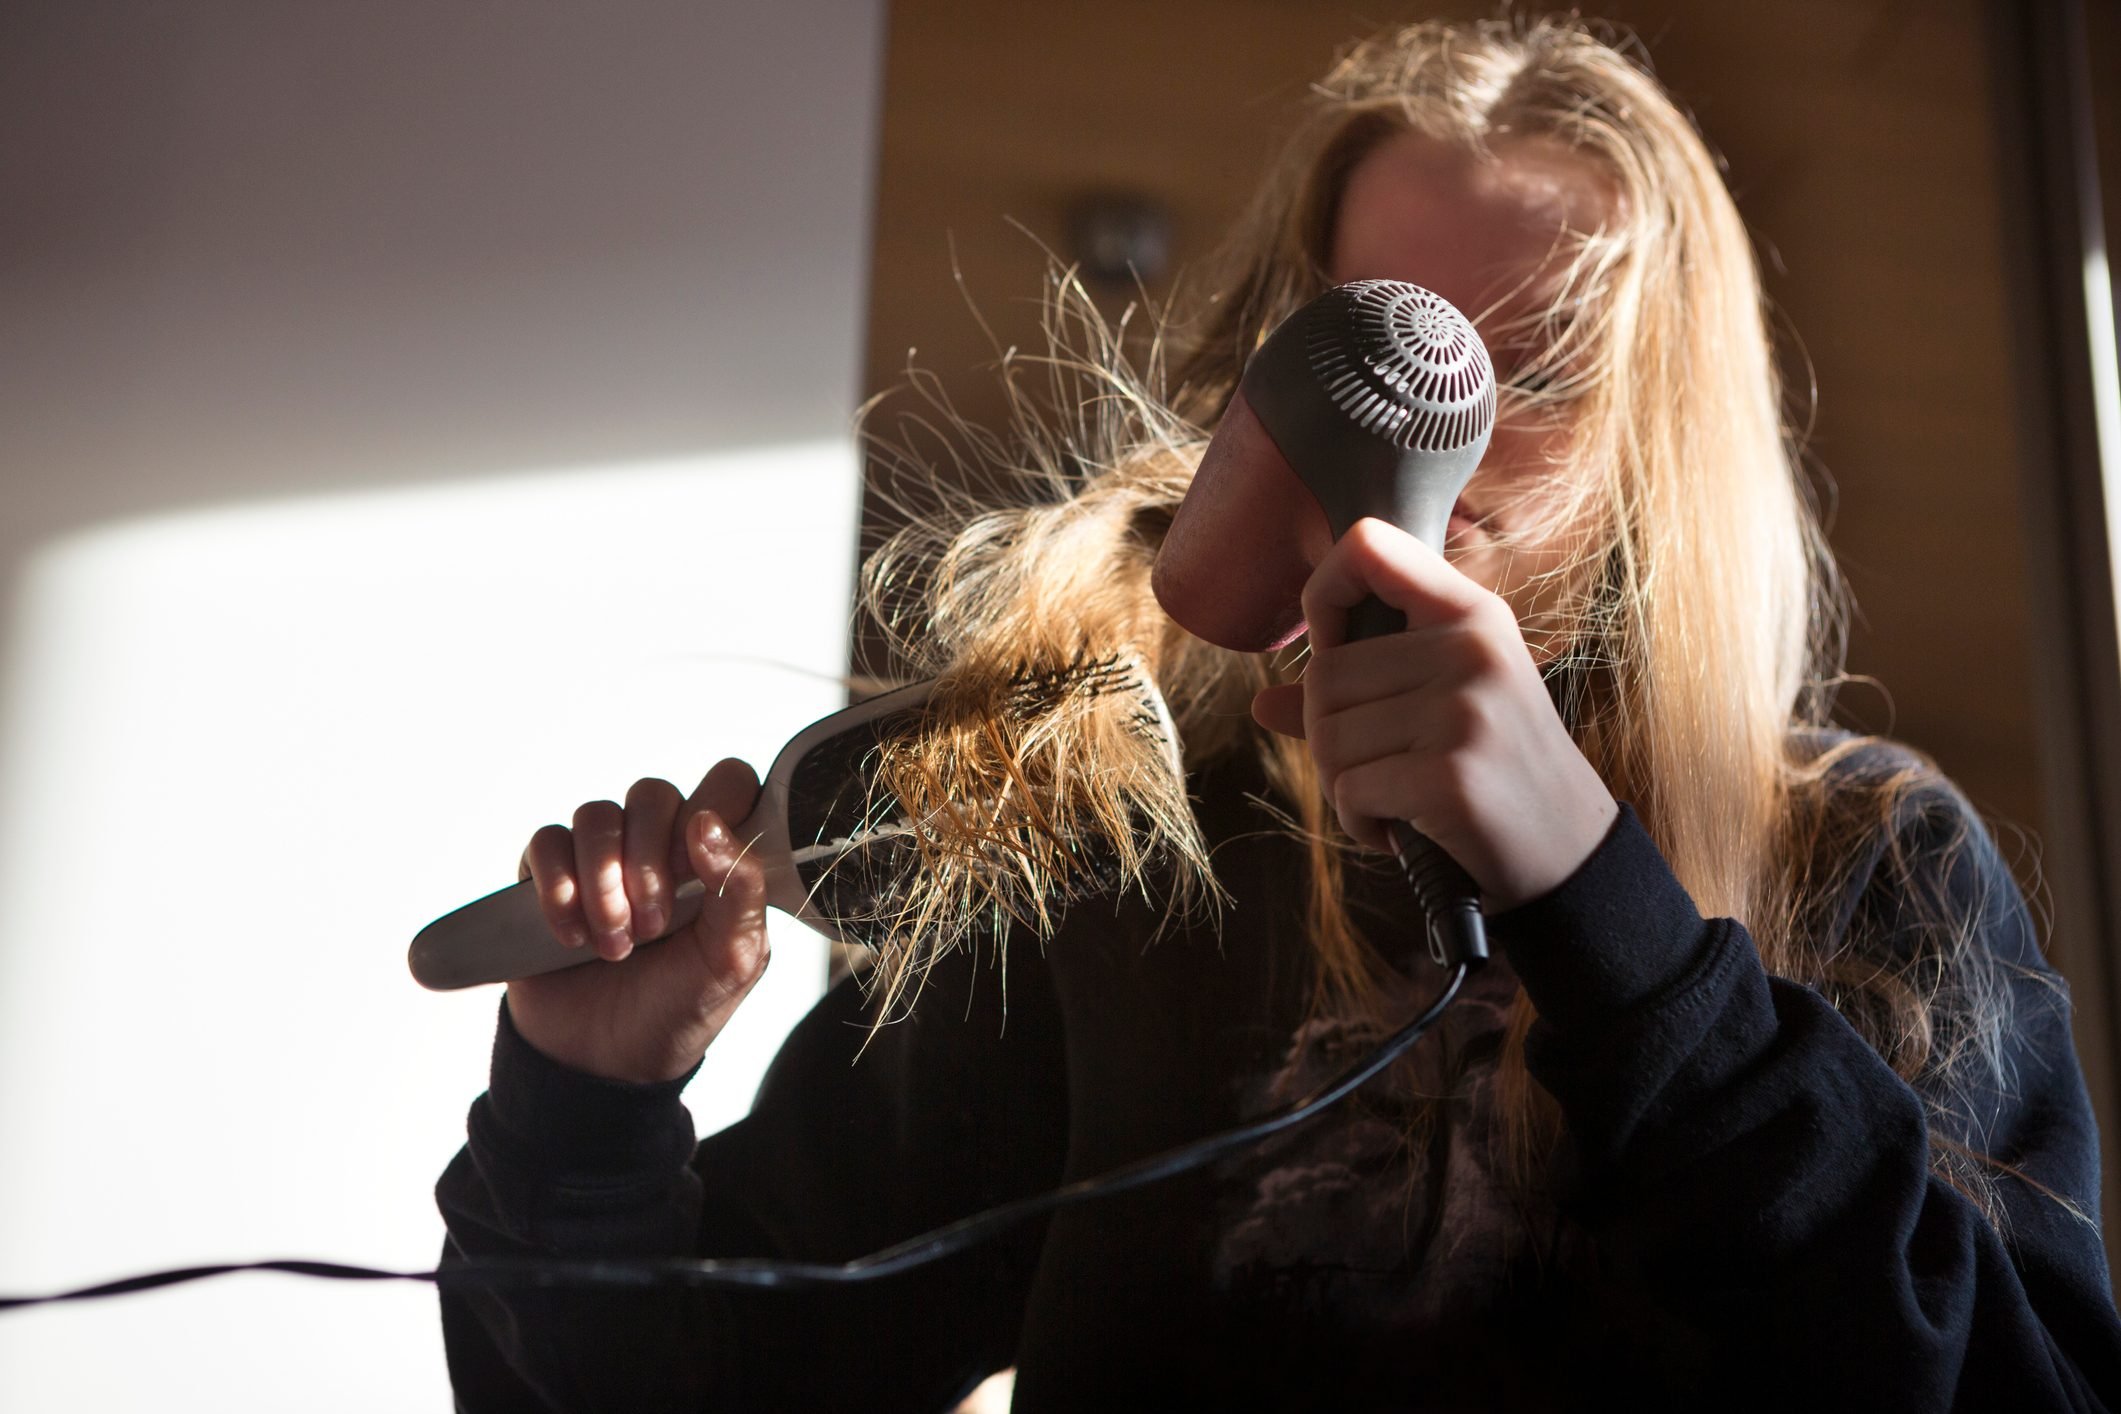 Girl (12-13) blow drying her long hair with an electric hairdryer in a bedroom